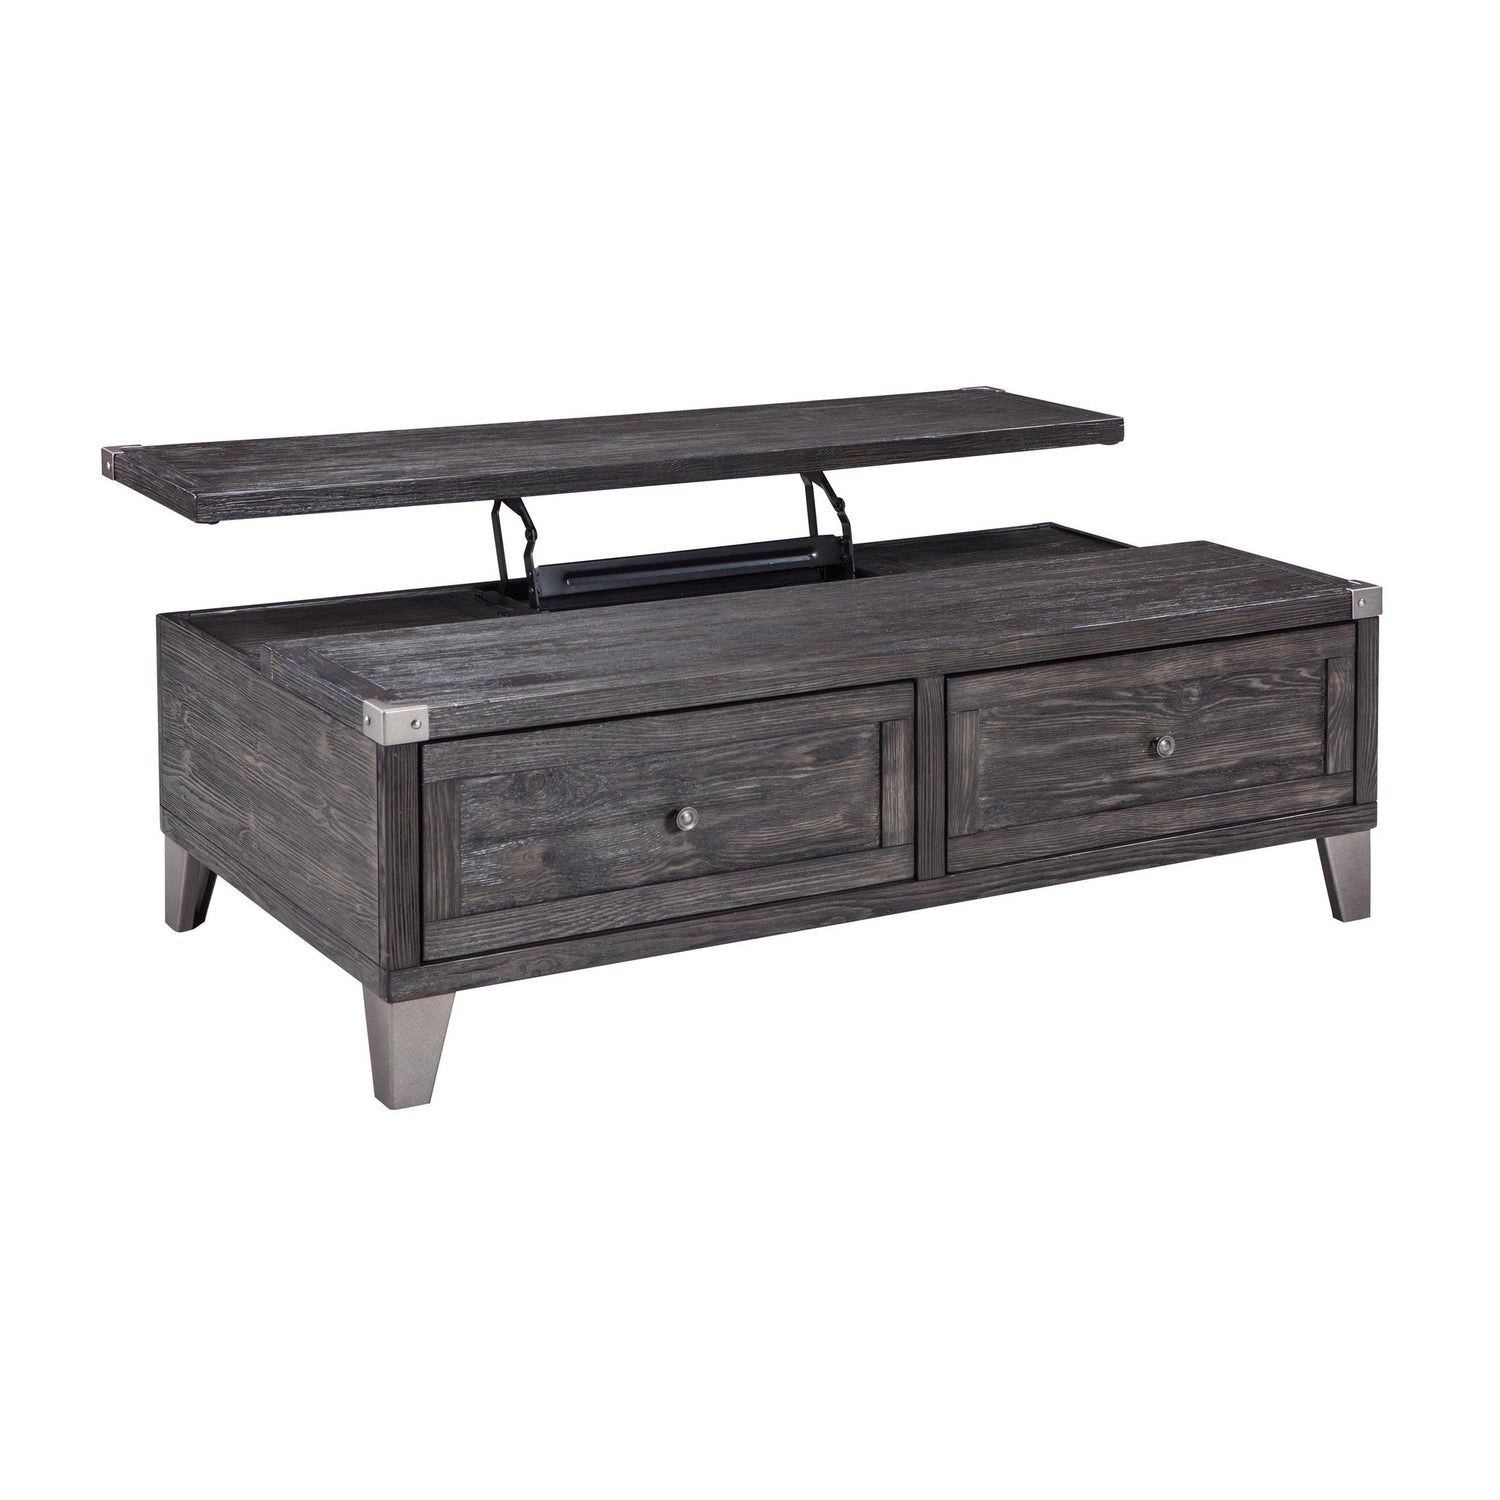 Todoe Coffee Table with Lift Top Ash-T901-9